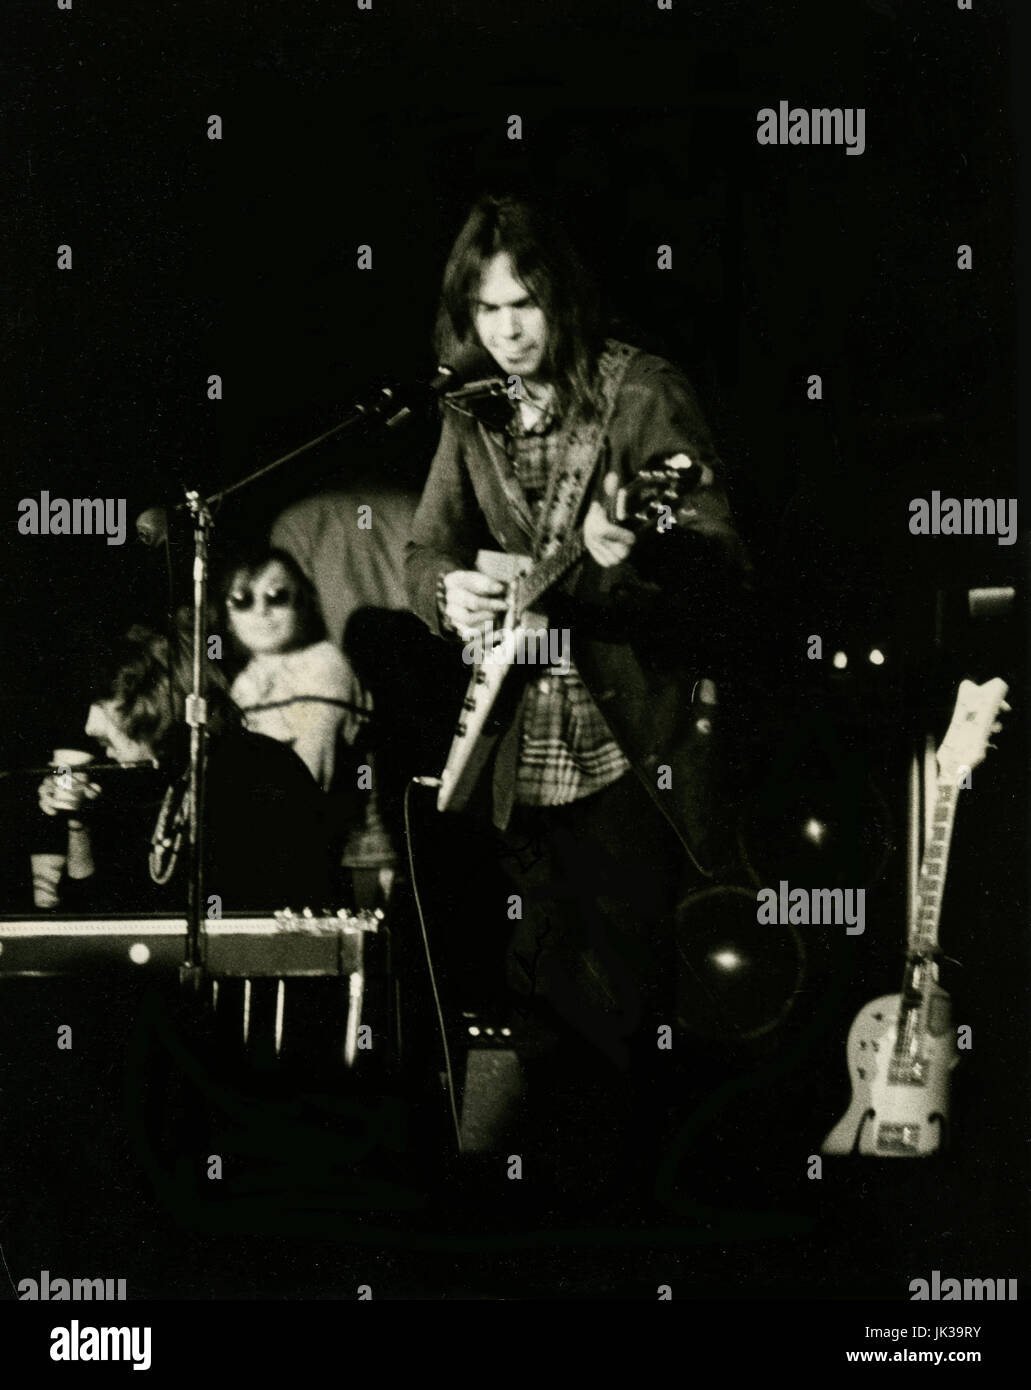 Neil Young in concert in San Francisco circa 1970s at Fillmore West. Stock Photo